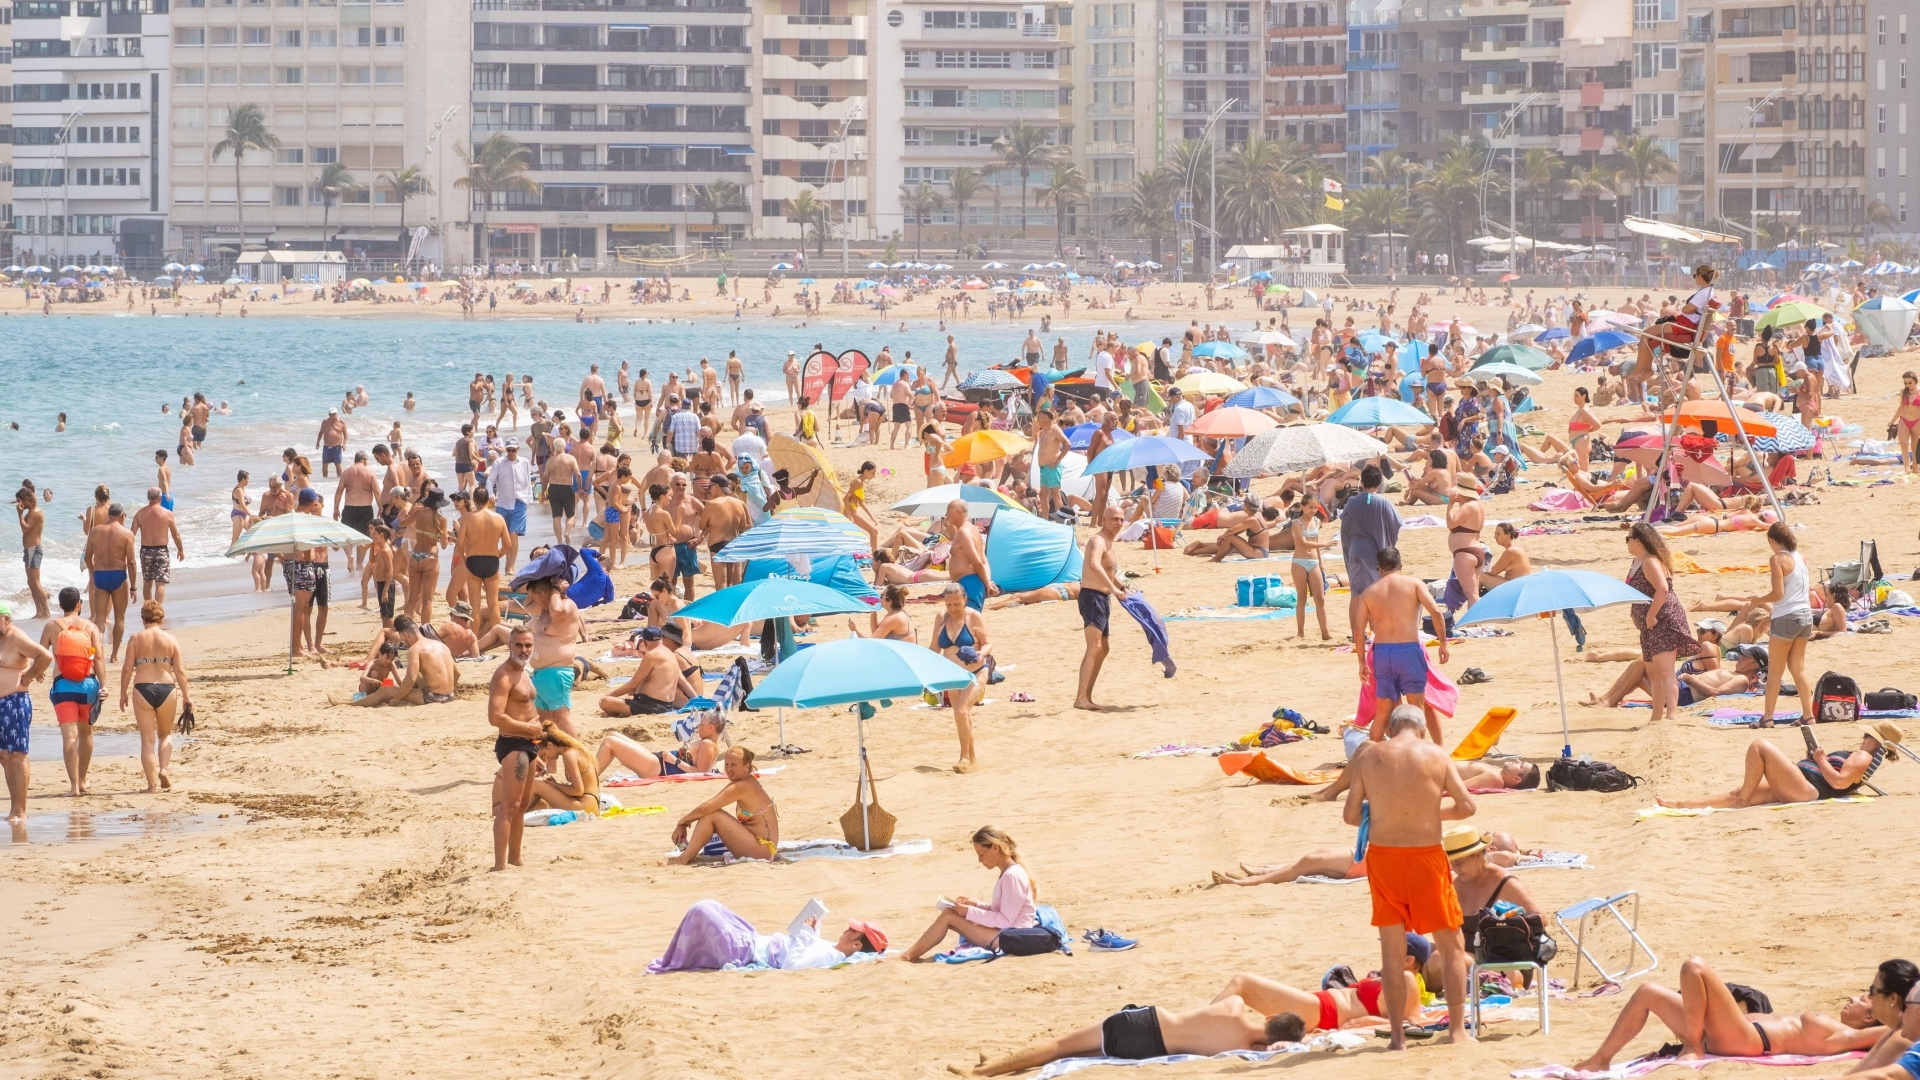 Brits travelling to Spain must show they have £85 for each day of holiday and prove two things under new restrictions